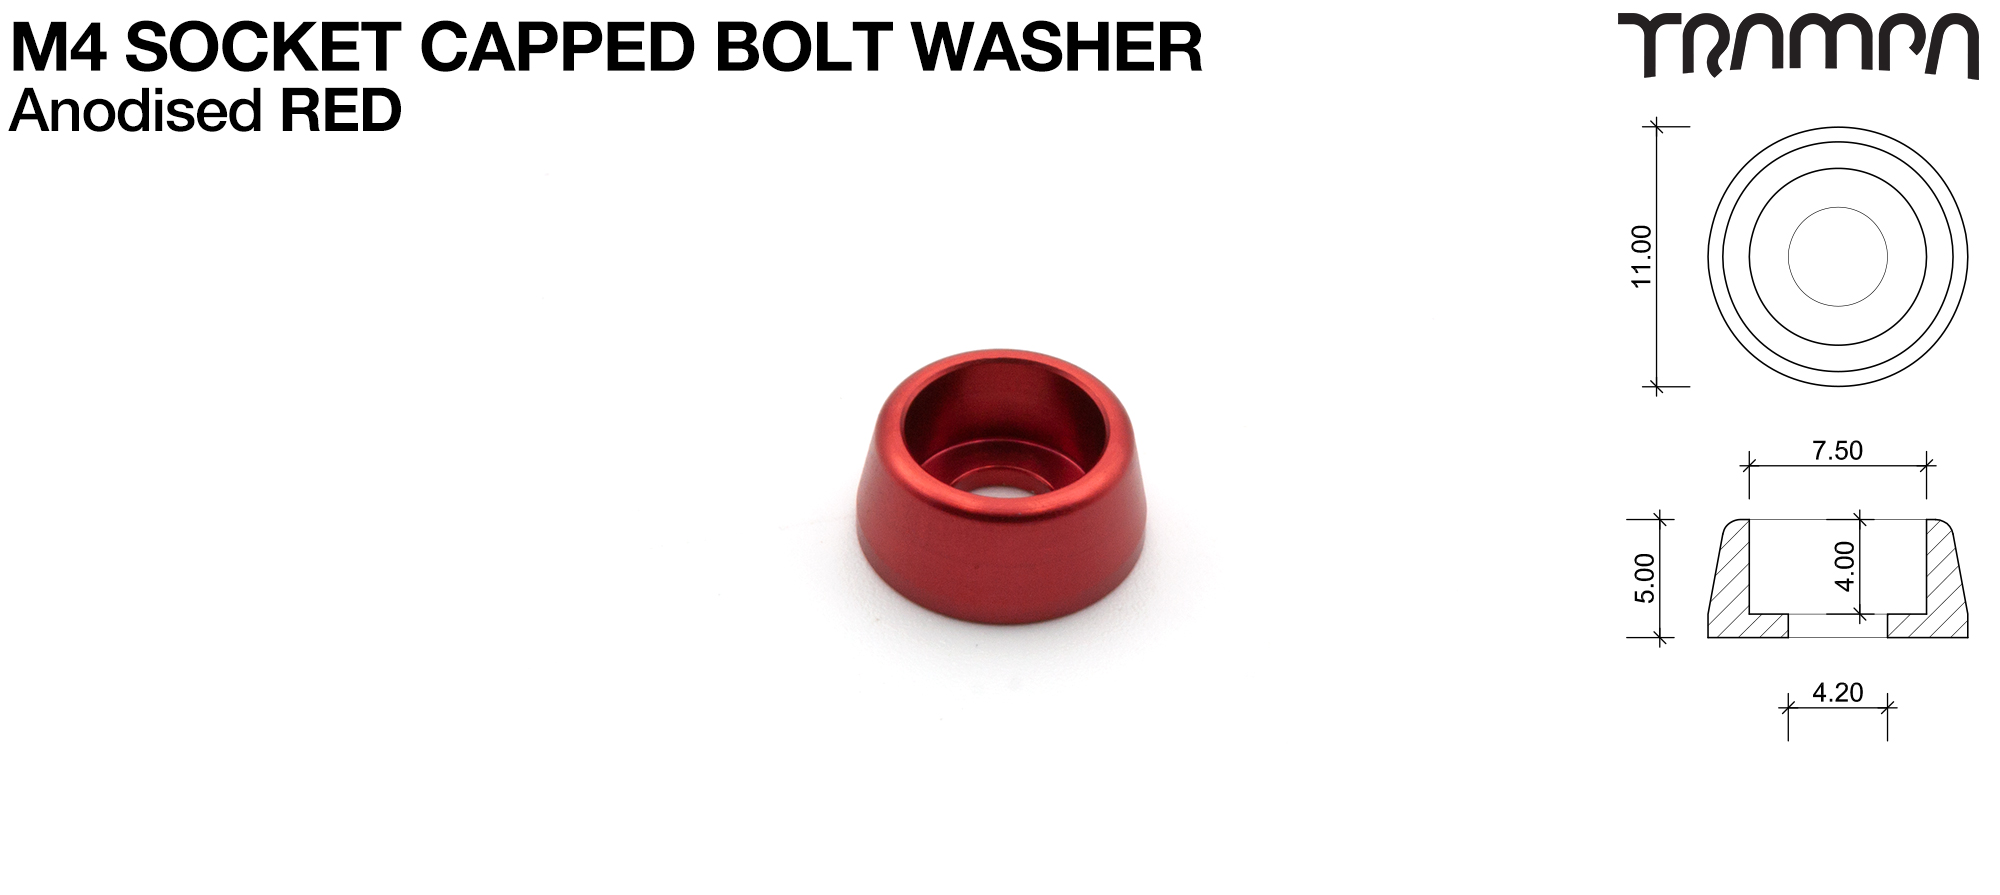 M4 Socket Capped Washer - Anodised RED